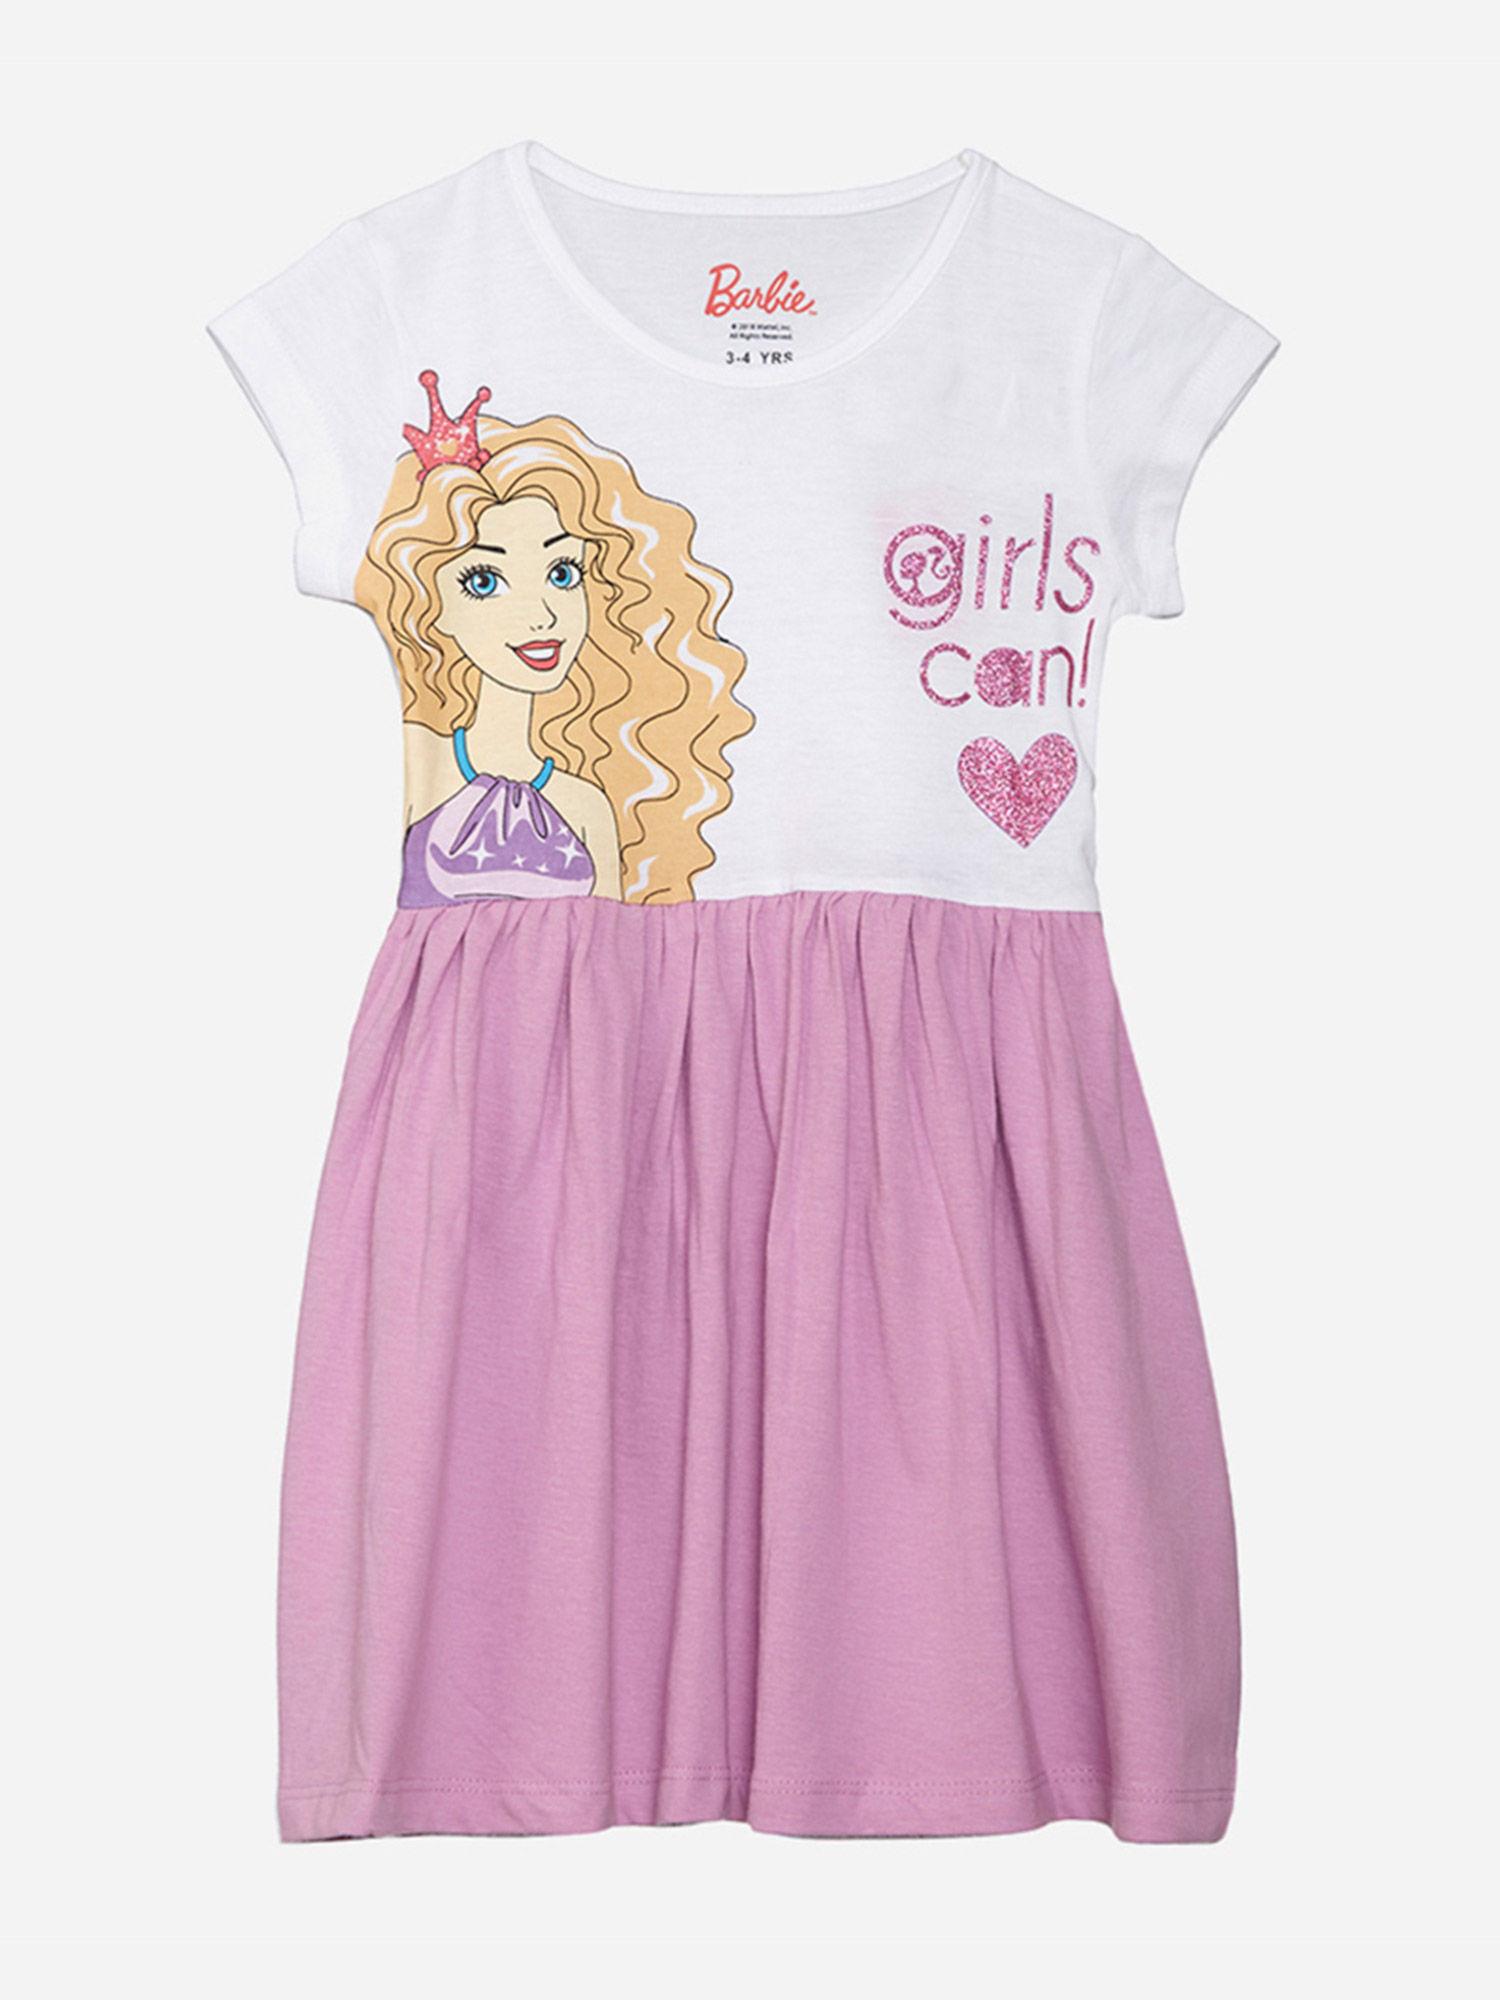 barbie featured white dress for girls